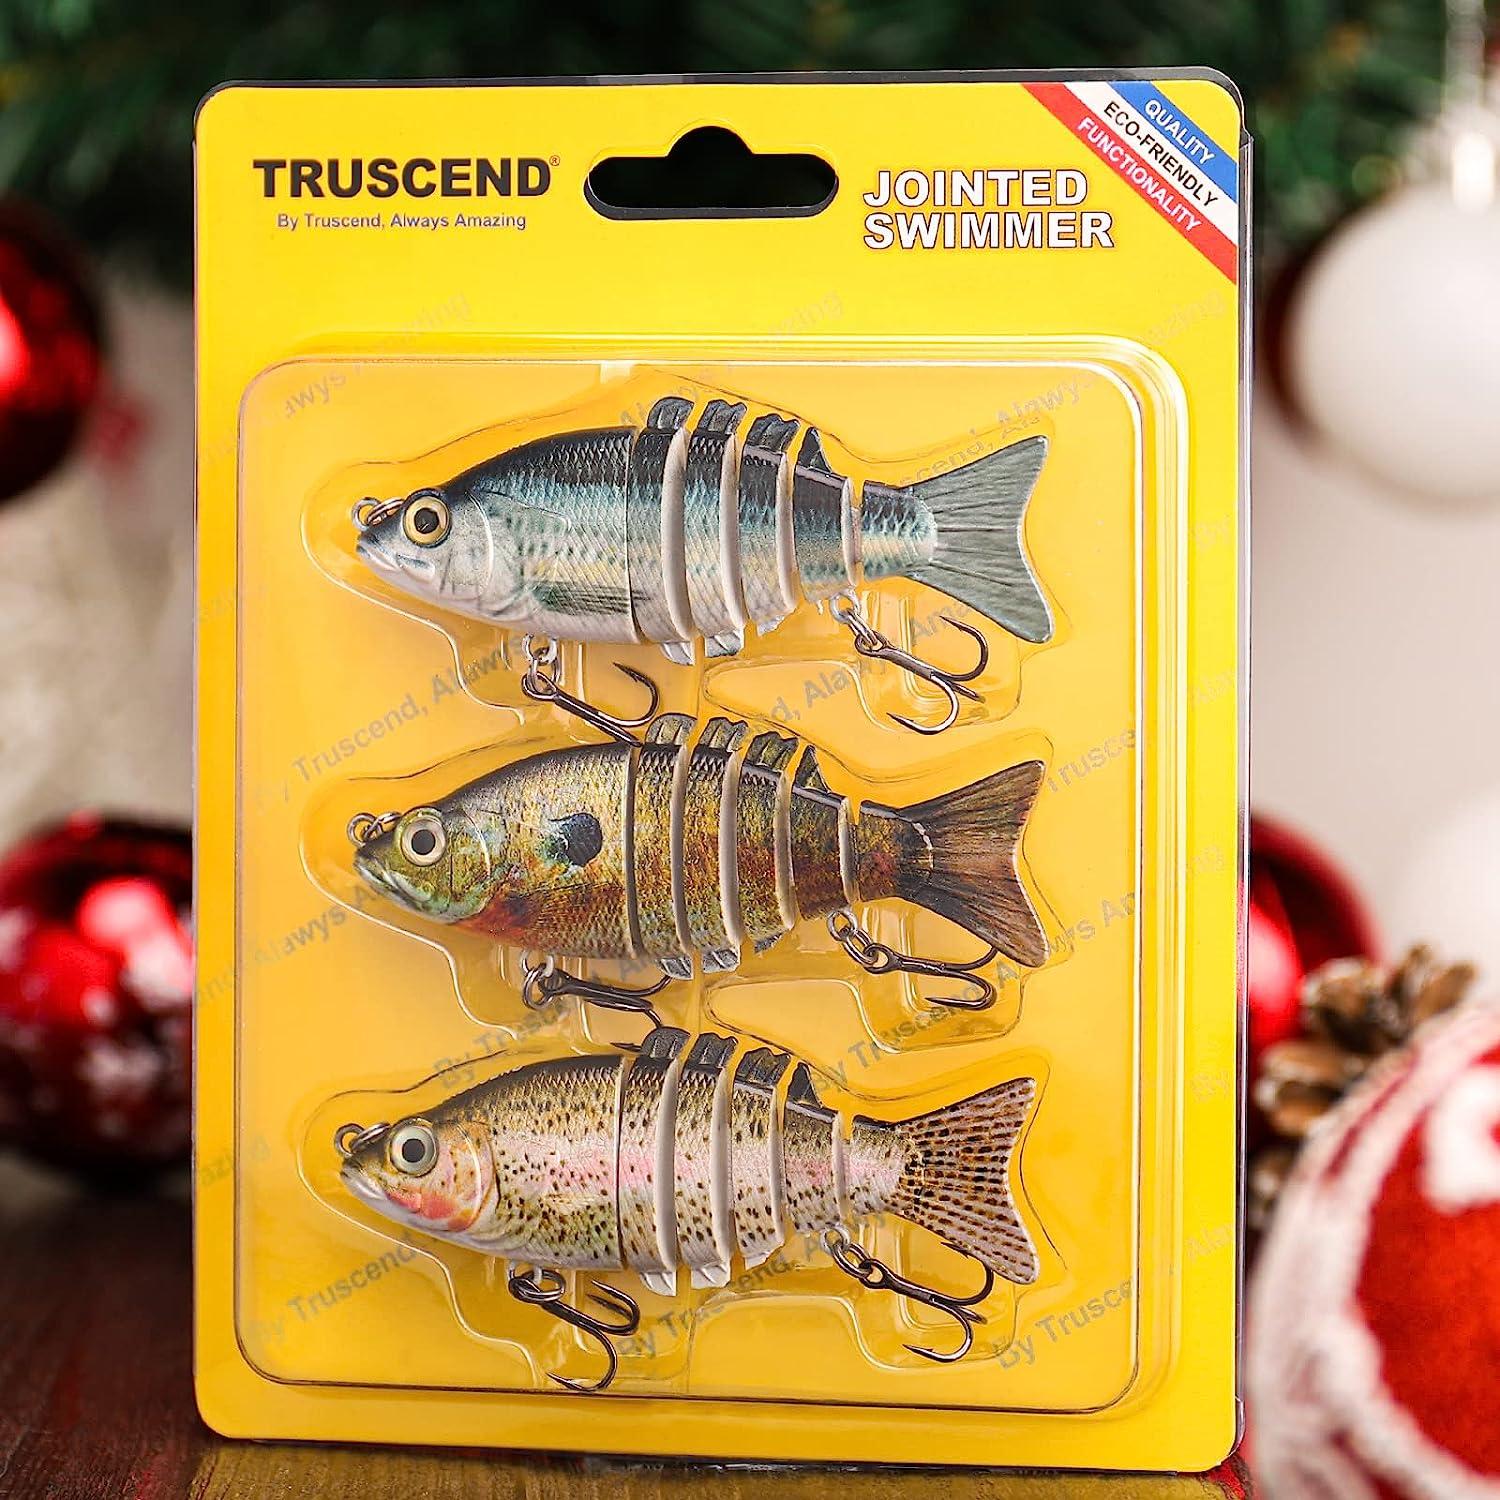 TRUSCEND Fishing Lures for Bass Trout, Multi Jointed Swimbaits, Slow  Sinking Bionic Swimming Lures for Freshwater Saltwater Bass Lifelike Fishing  Lures Kit A2-3,0.4oz